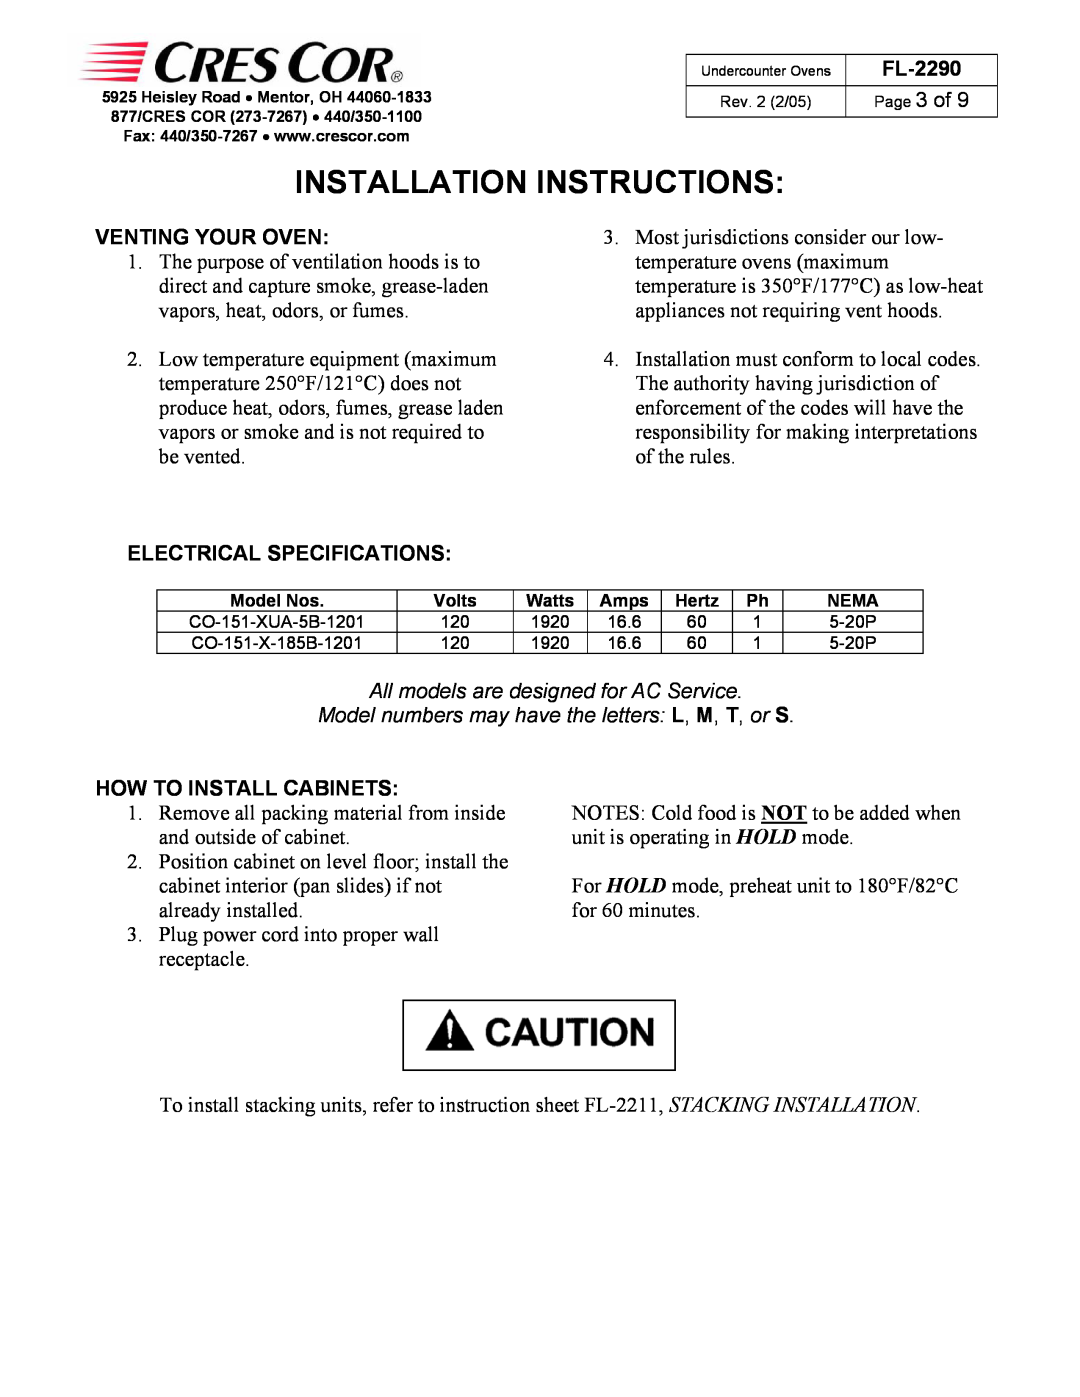 Cres Cor CO151XUA5B, CO151X185B manual Installation Instructions, FL-2290, Venting Your Oven, Electrical Specifications 